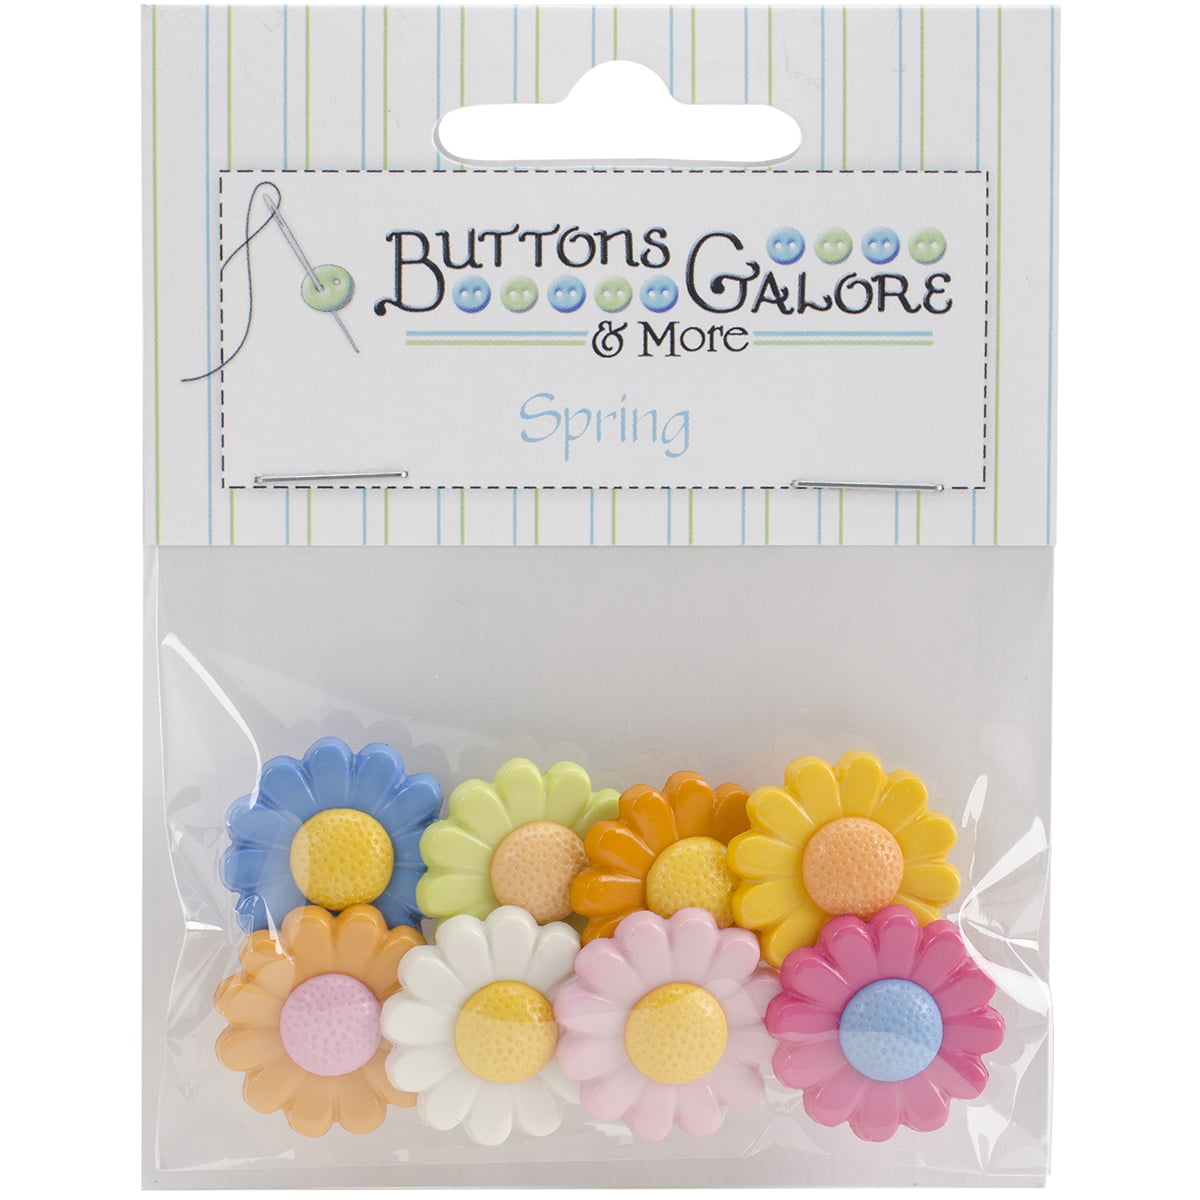 Marigolds Flowers Sew Thru Button Embellishments Buttons Galore Flower Power Collection